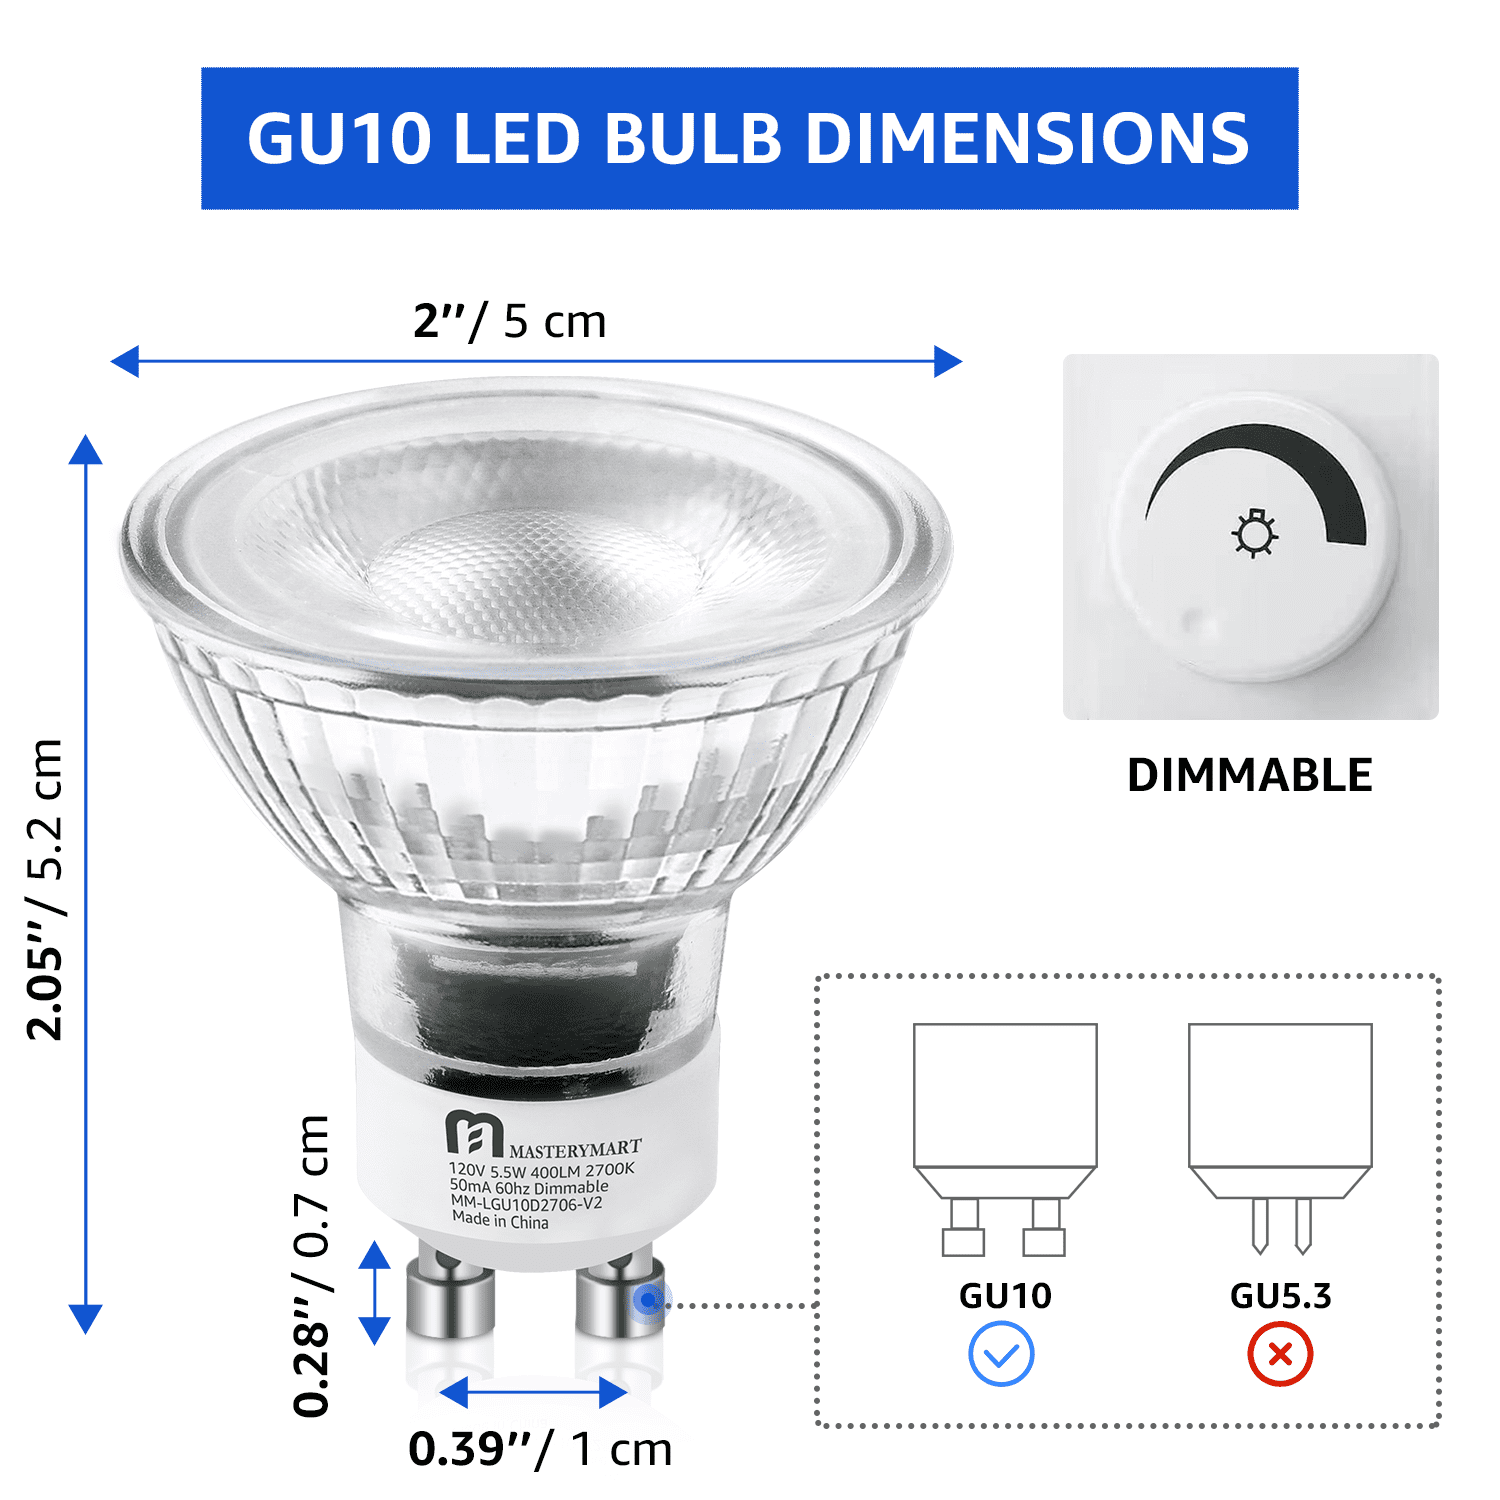 Mastery Mart Dimmable GU10 LED Light Bulbs, 50W Equivalent, 400LM, 2700K  Soft White, Lasts 25,000hrs, 6-pack